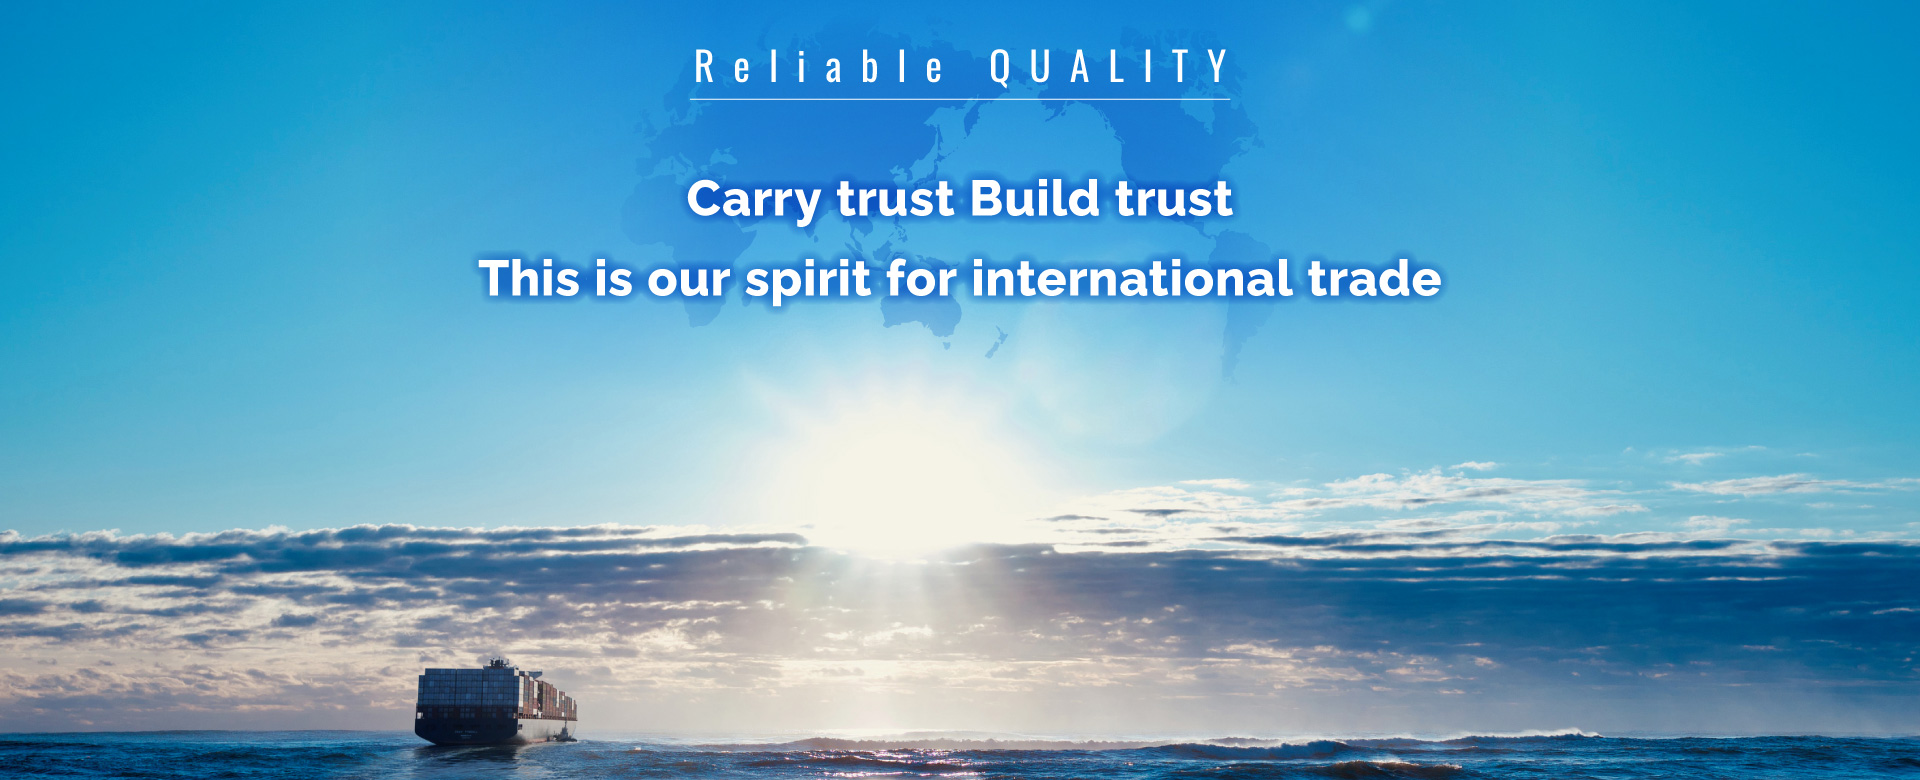 Reliable QUALITY - Carry trust Build trust. This is our spirit for international trade.